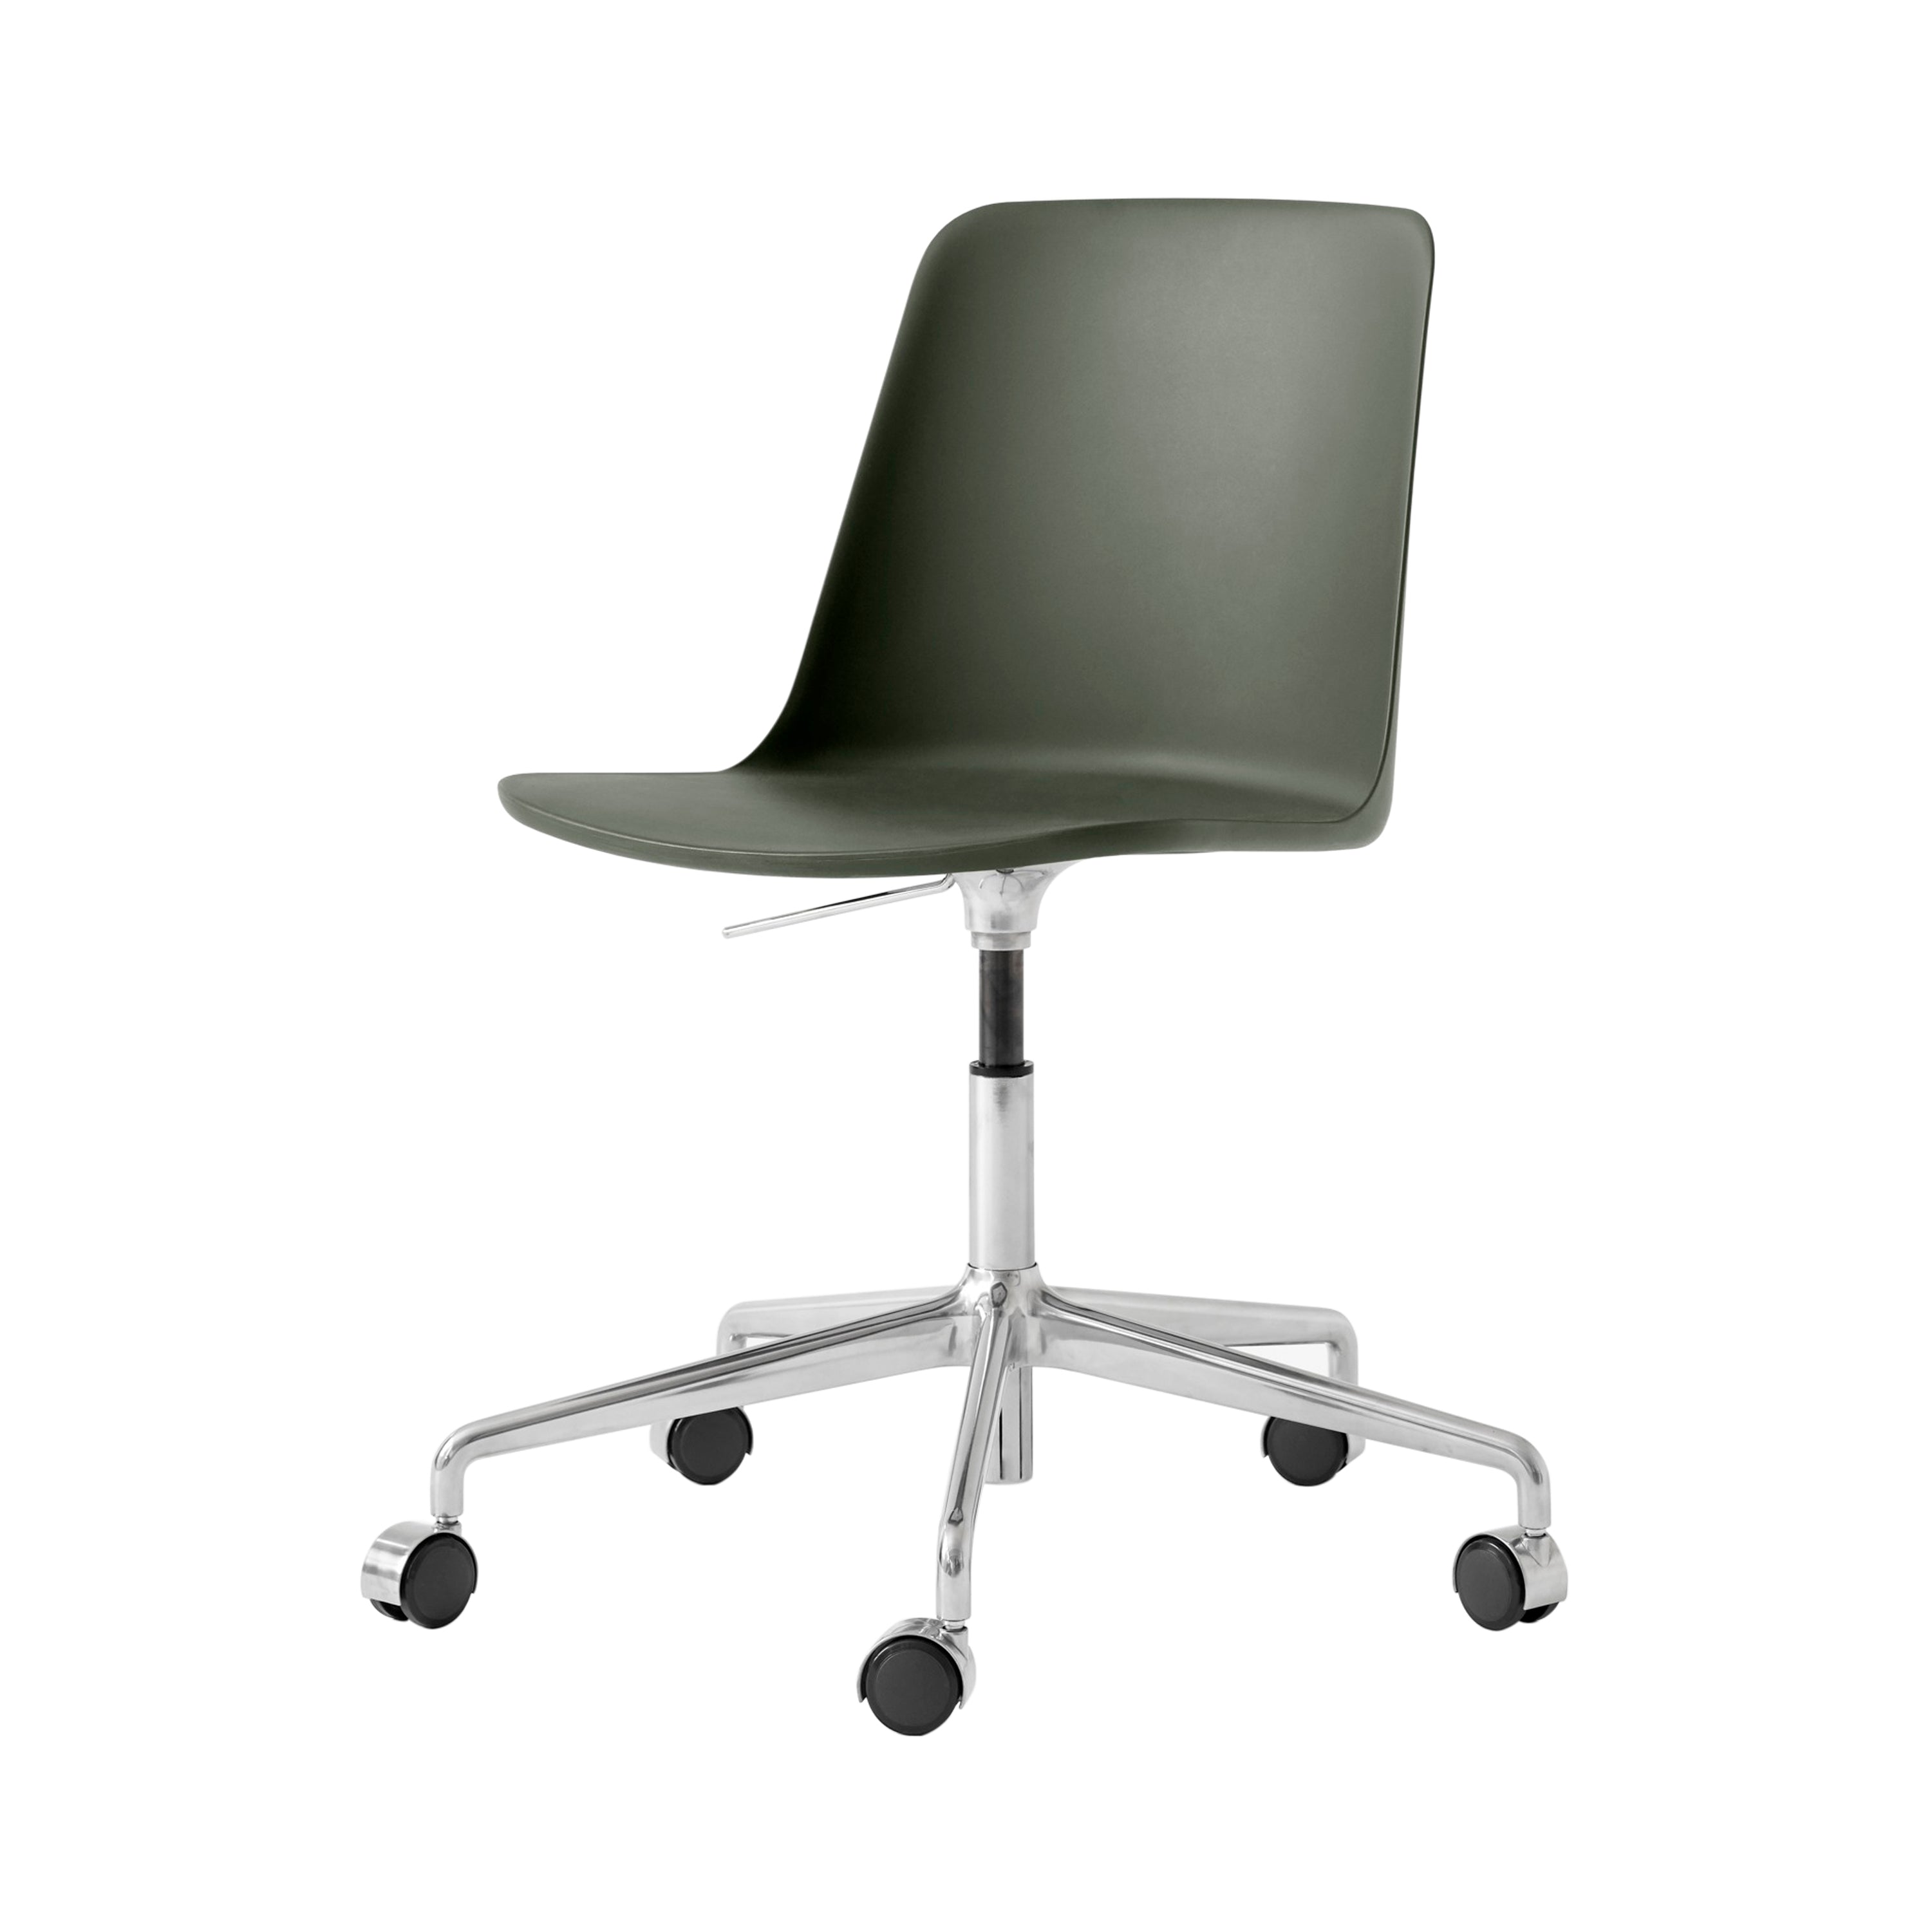 Rely Chair HW28: Bronze Green + Polished Aluminum